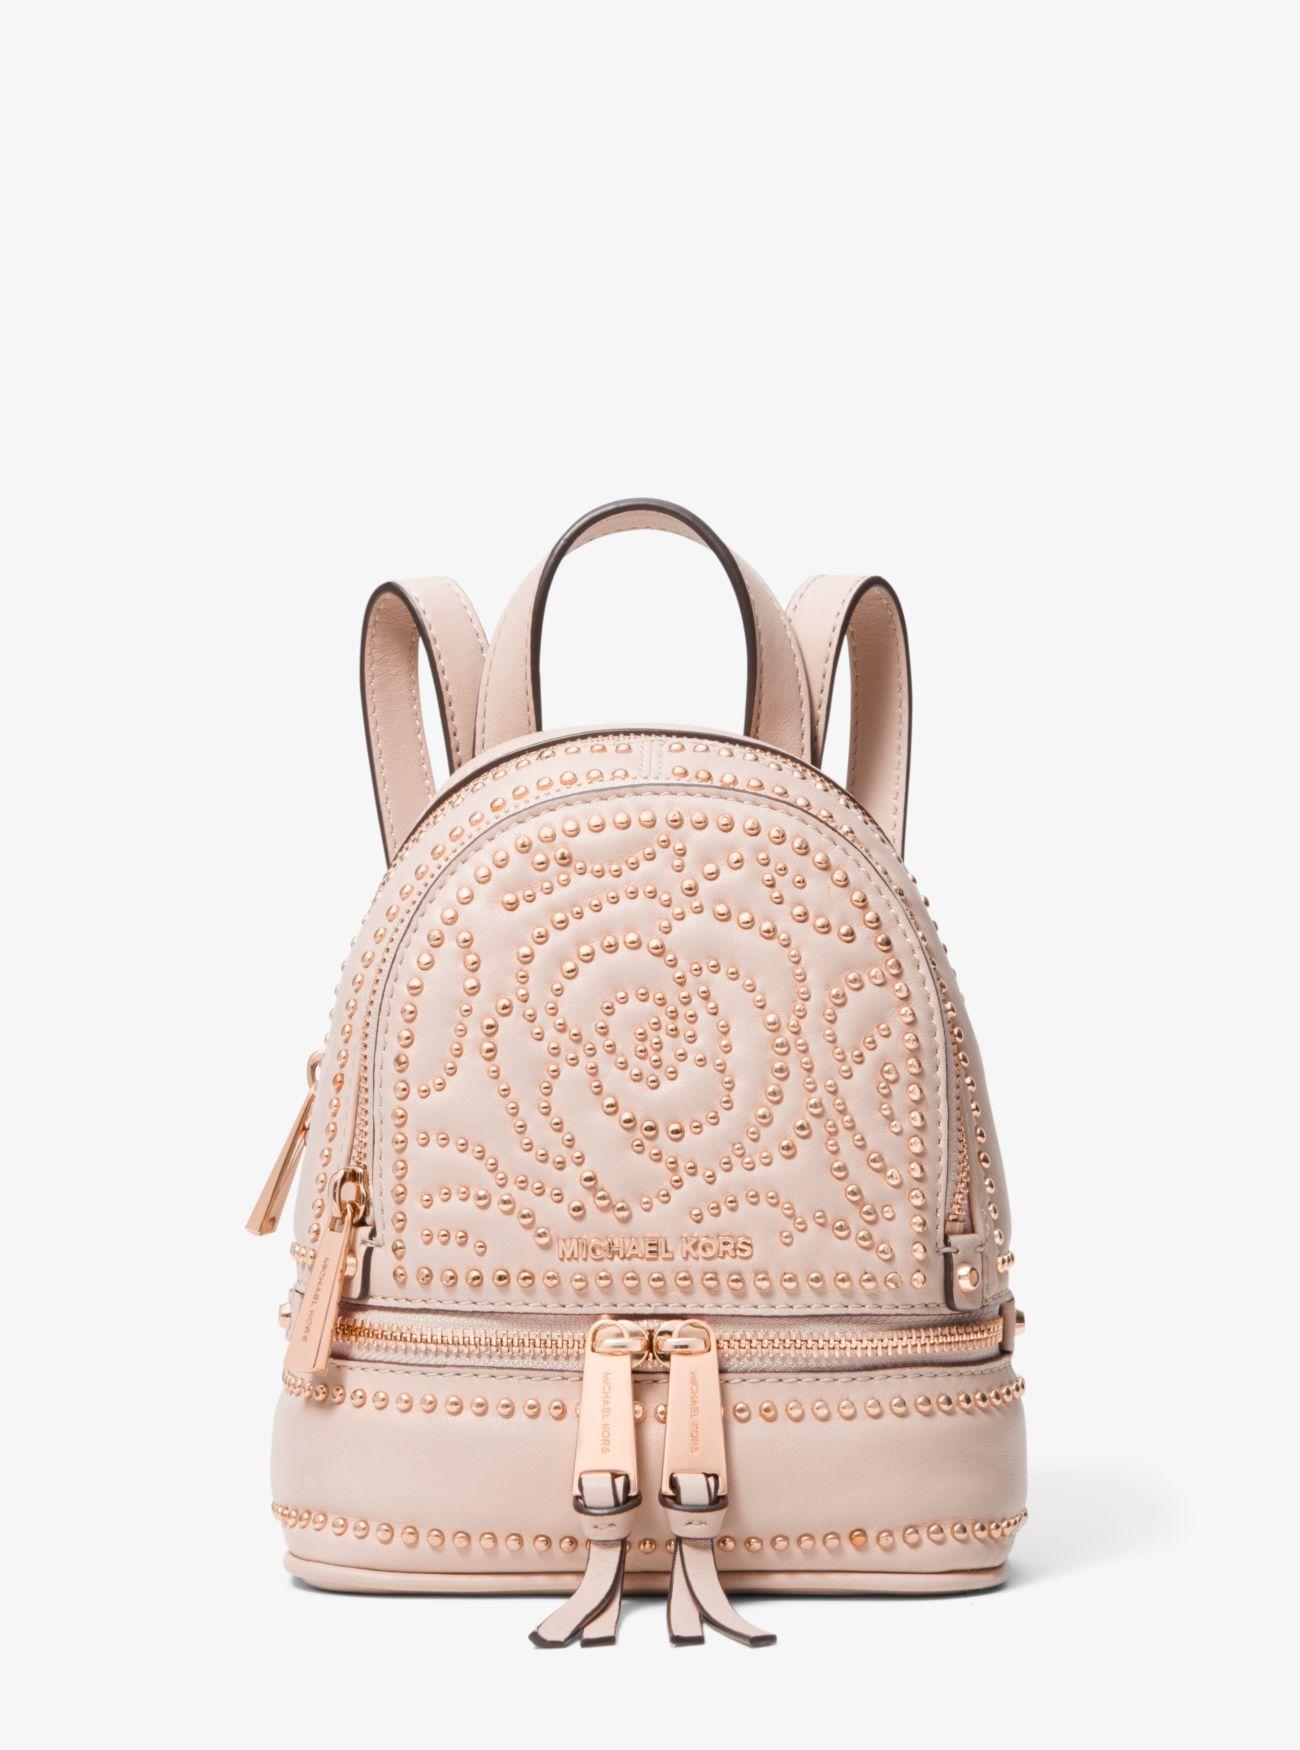 Michael Kors Rhea Mini Rose Studded Leather Backpack in Pink | Lyst